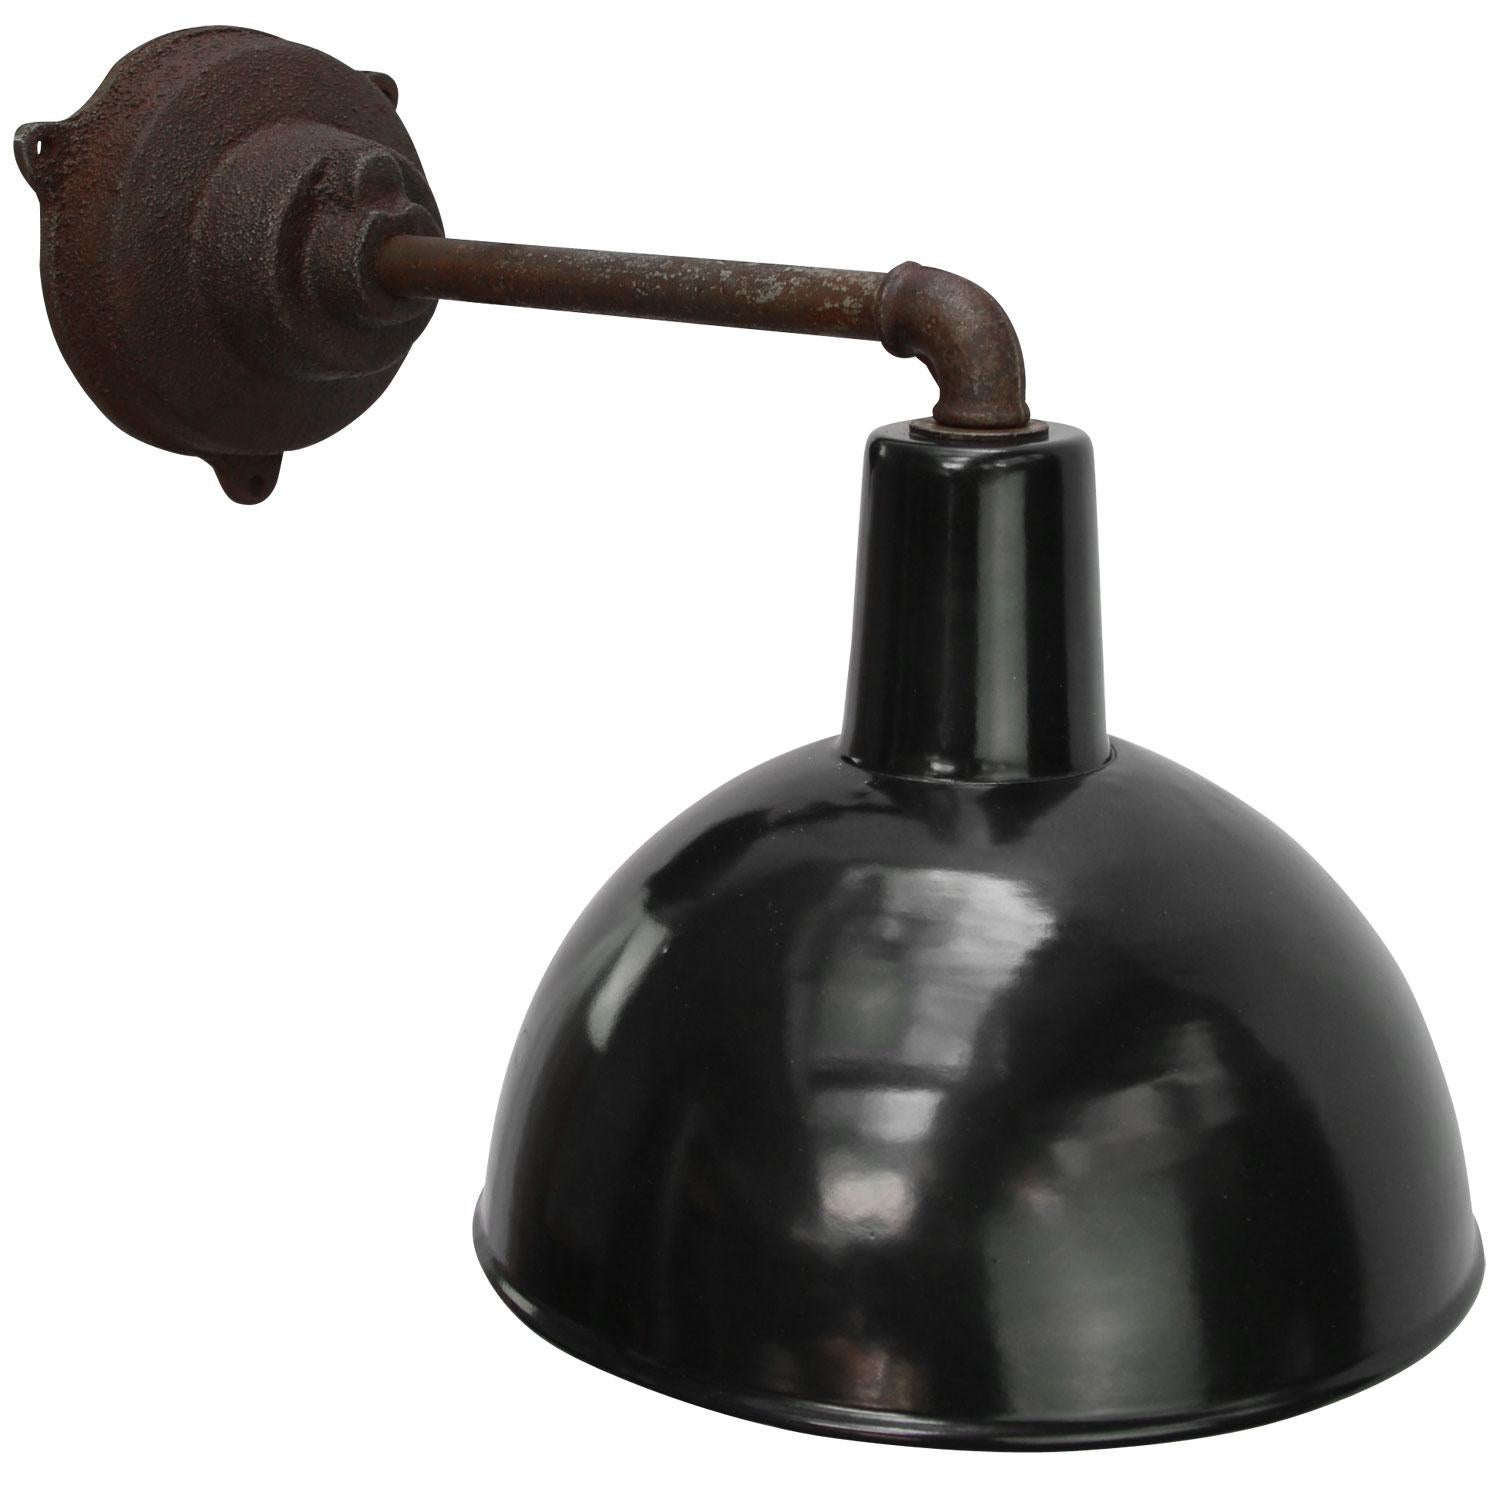 Factory wall light. Black enamel. White interior. 

Diameter cast iron wall piece: 12 cm, three holes to secure.

Weight: 3.00 kg / 6.6 lb

All lamps have been made suitable by international standards for incandescent light bulbs,